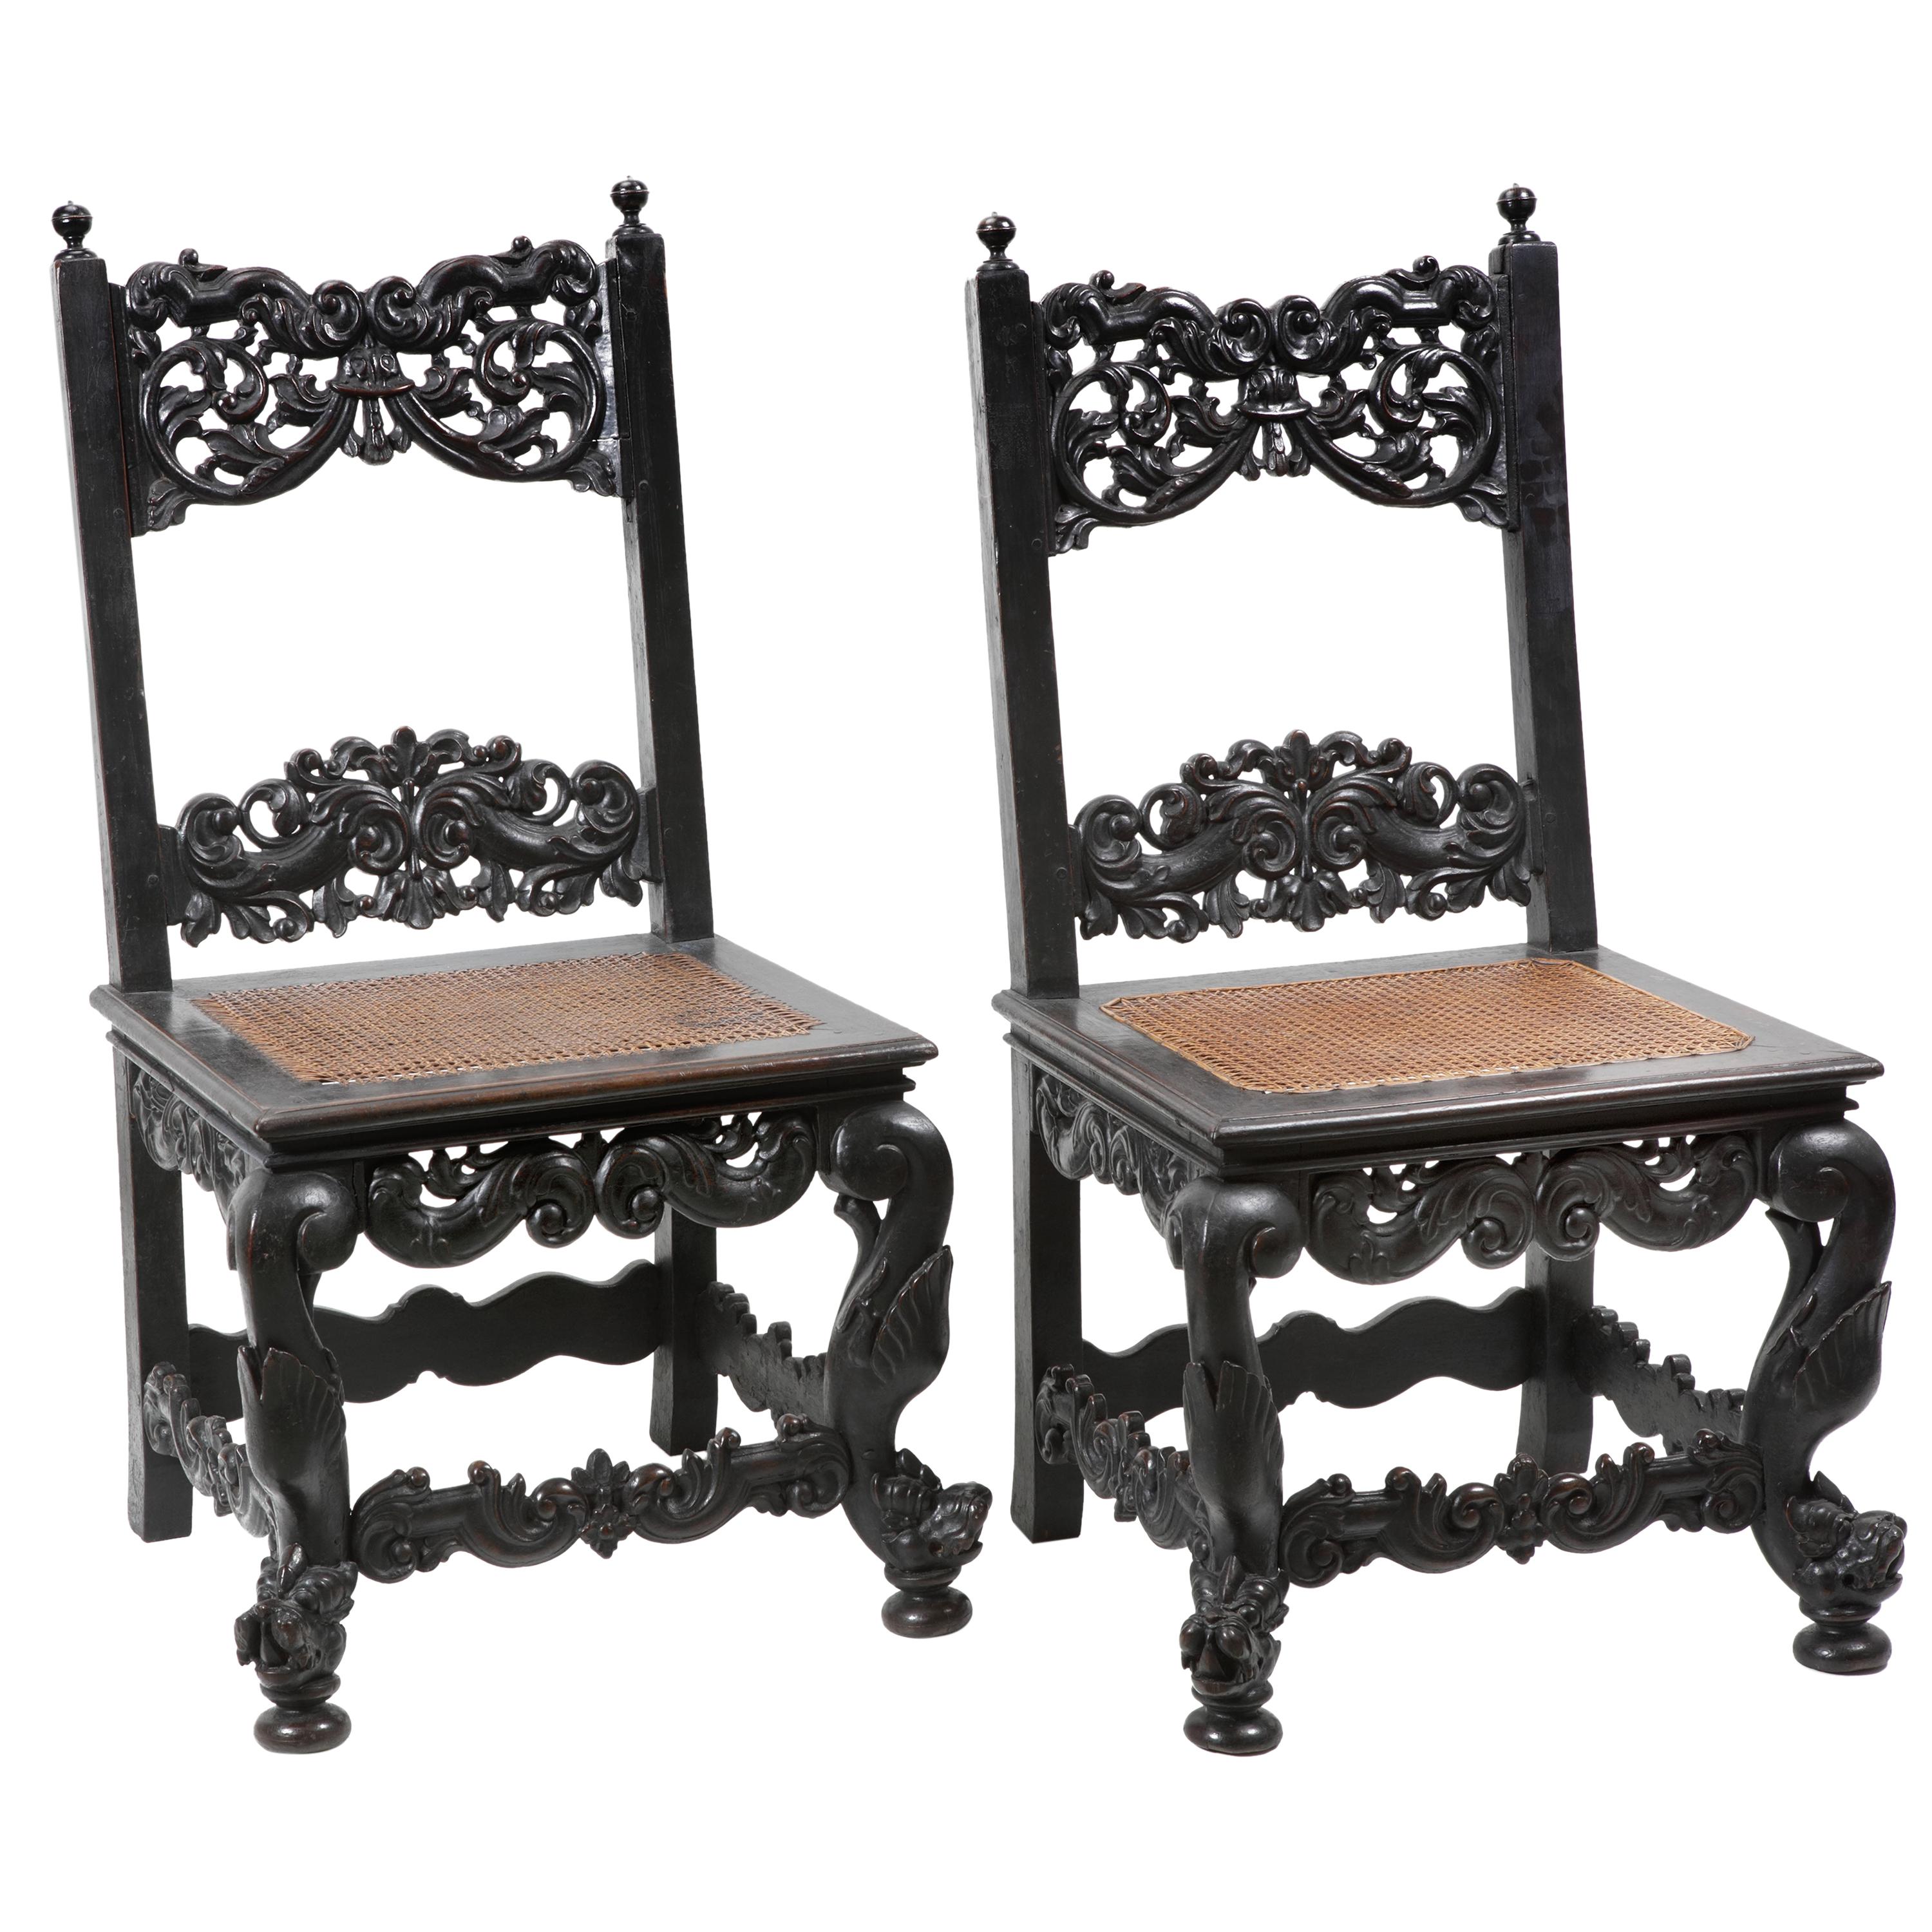 Pair of Colonial Hardwood Side Chairs with Rattan Seats, 18th Century